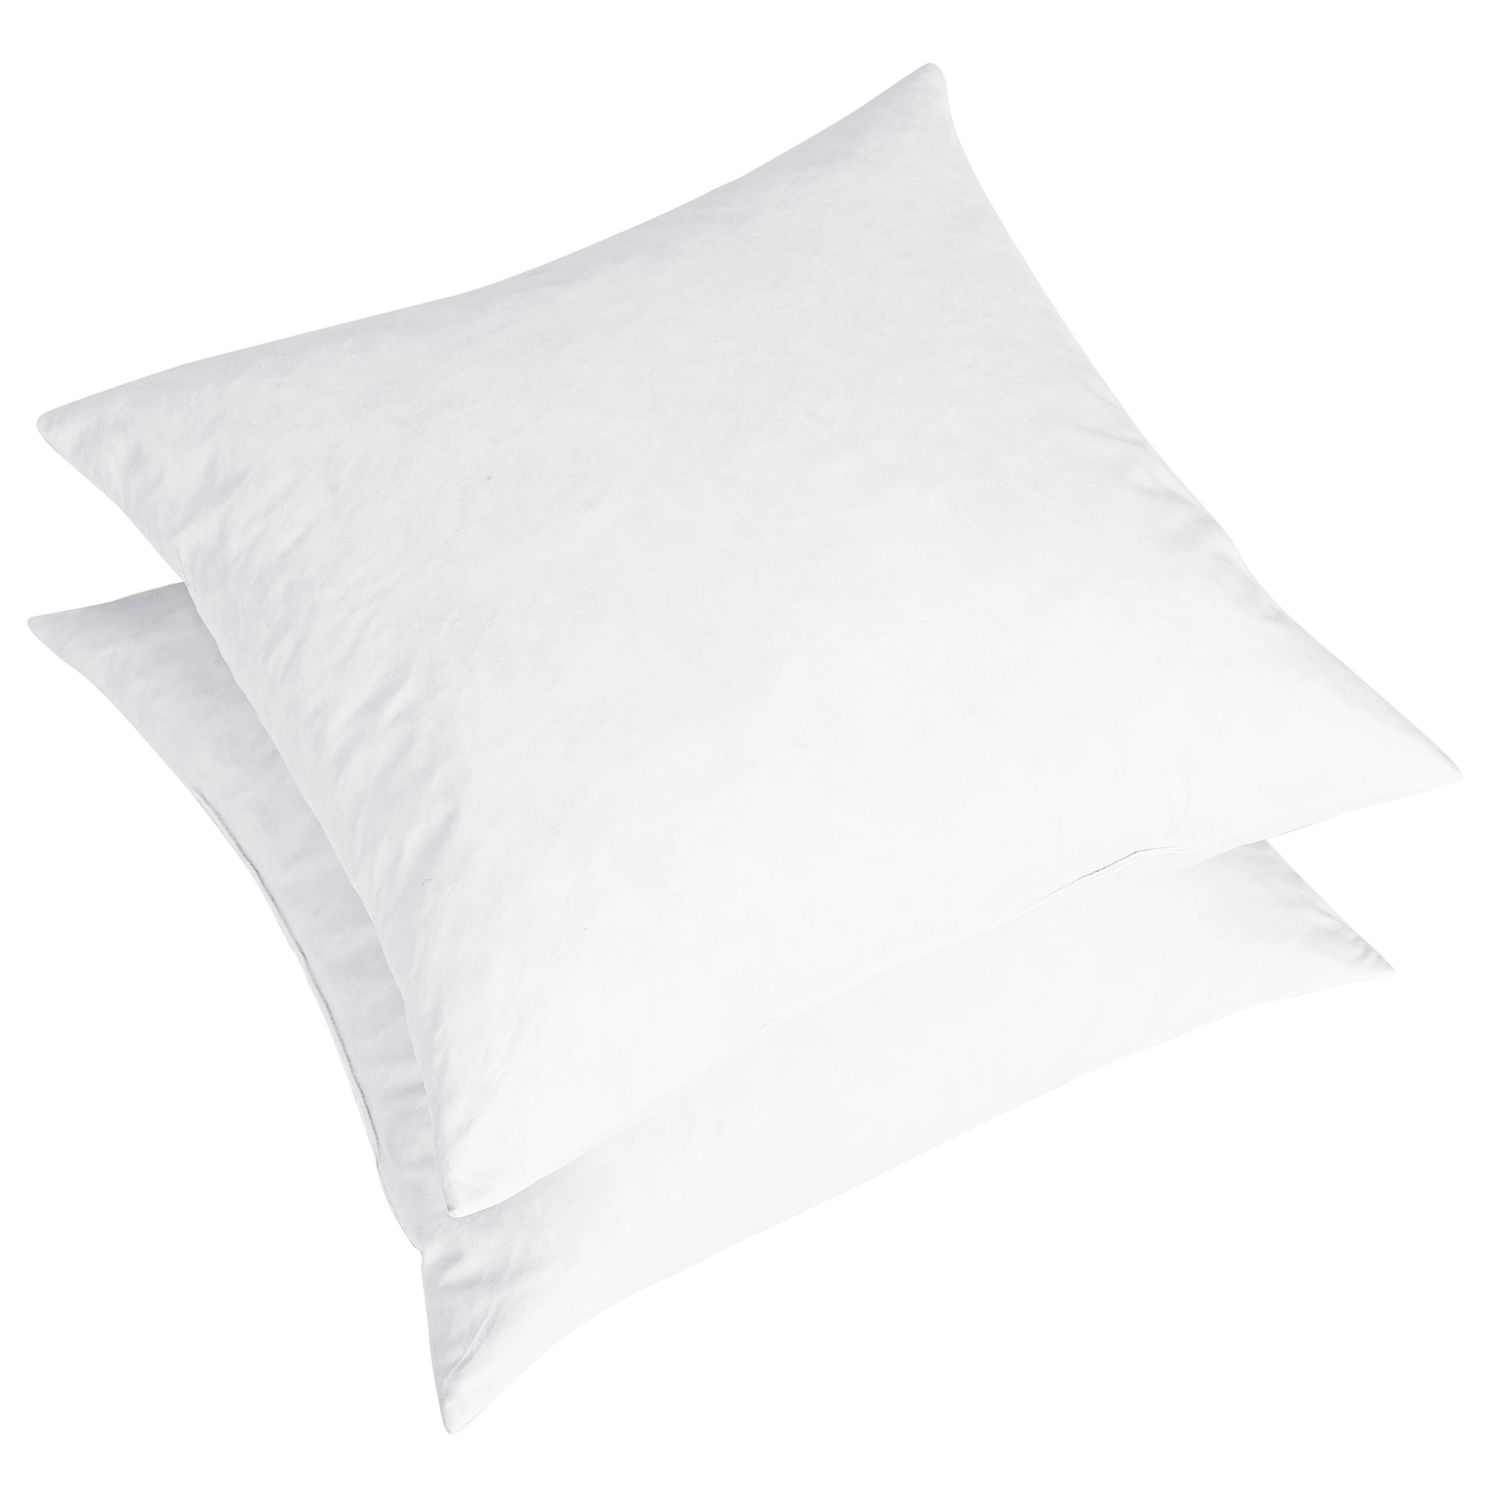 Image for Dream On 2-pack White Goose Feather Square Pillow Insert at Kohl's.